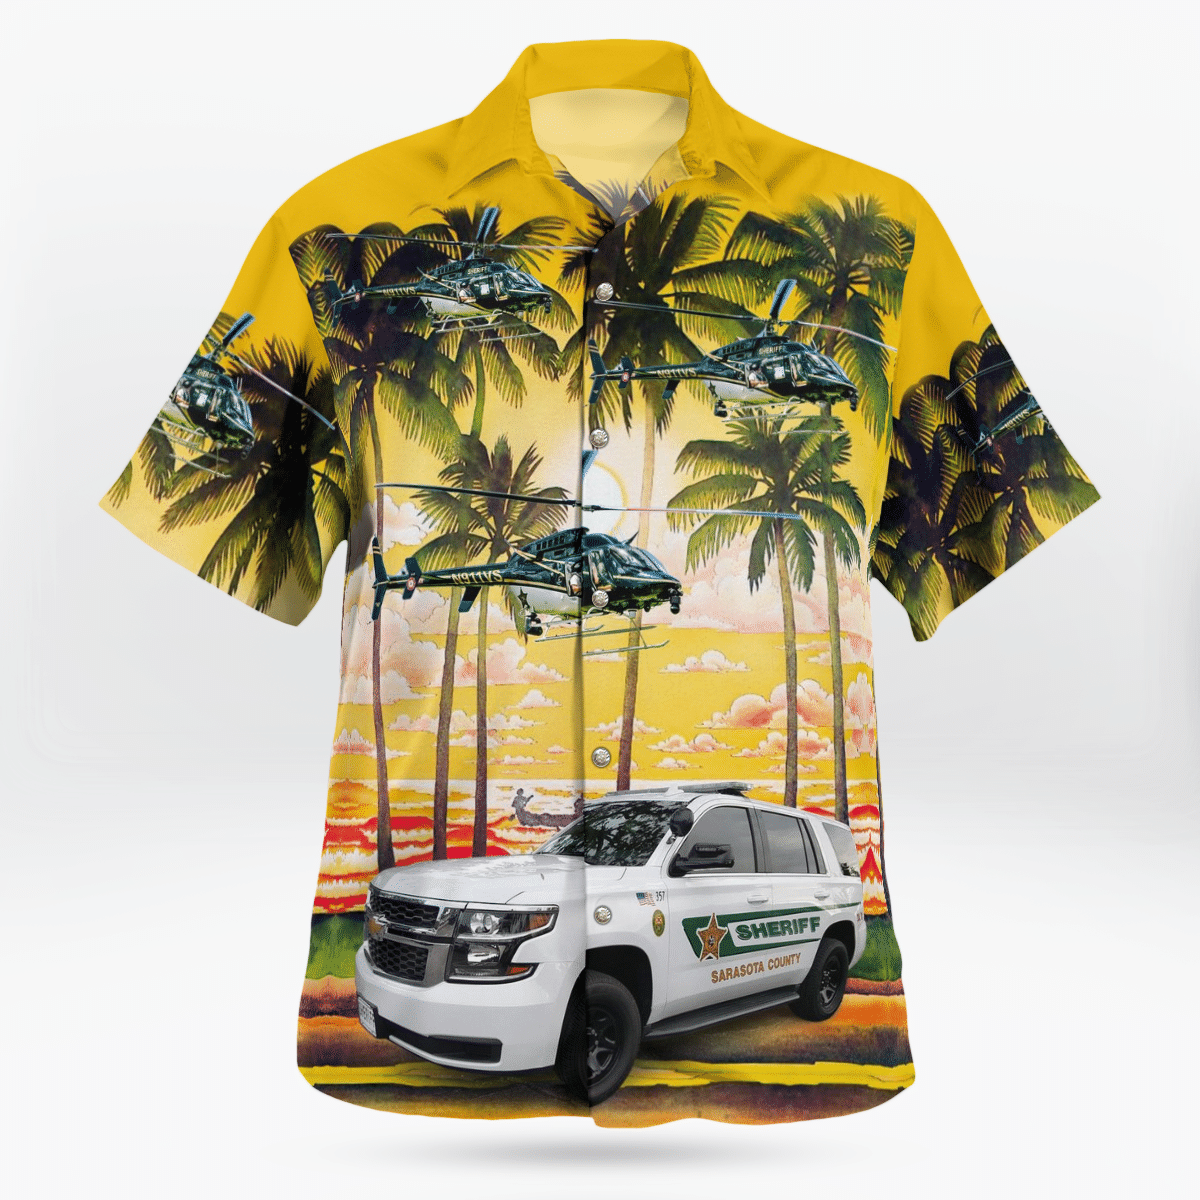 Hawaiian shirts never go out of style 51